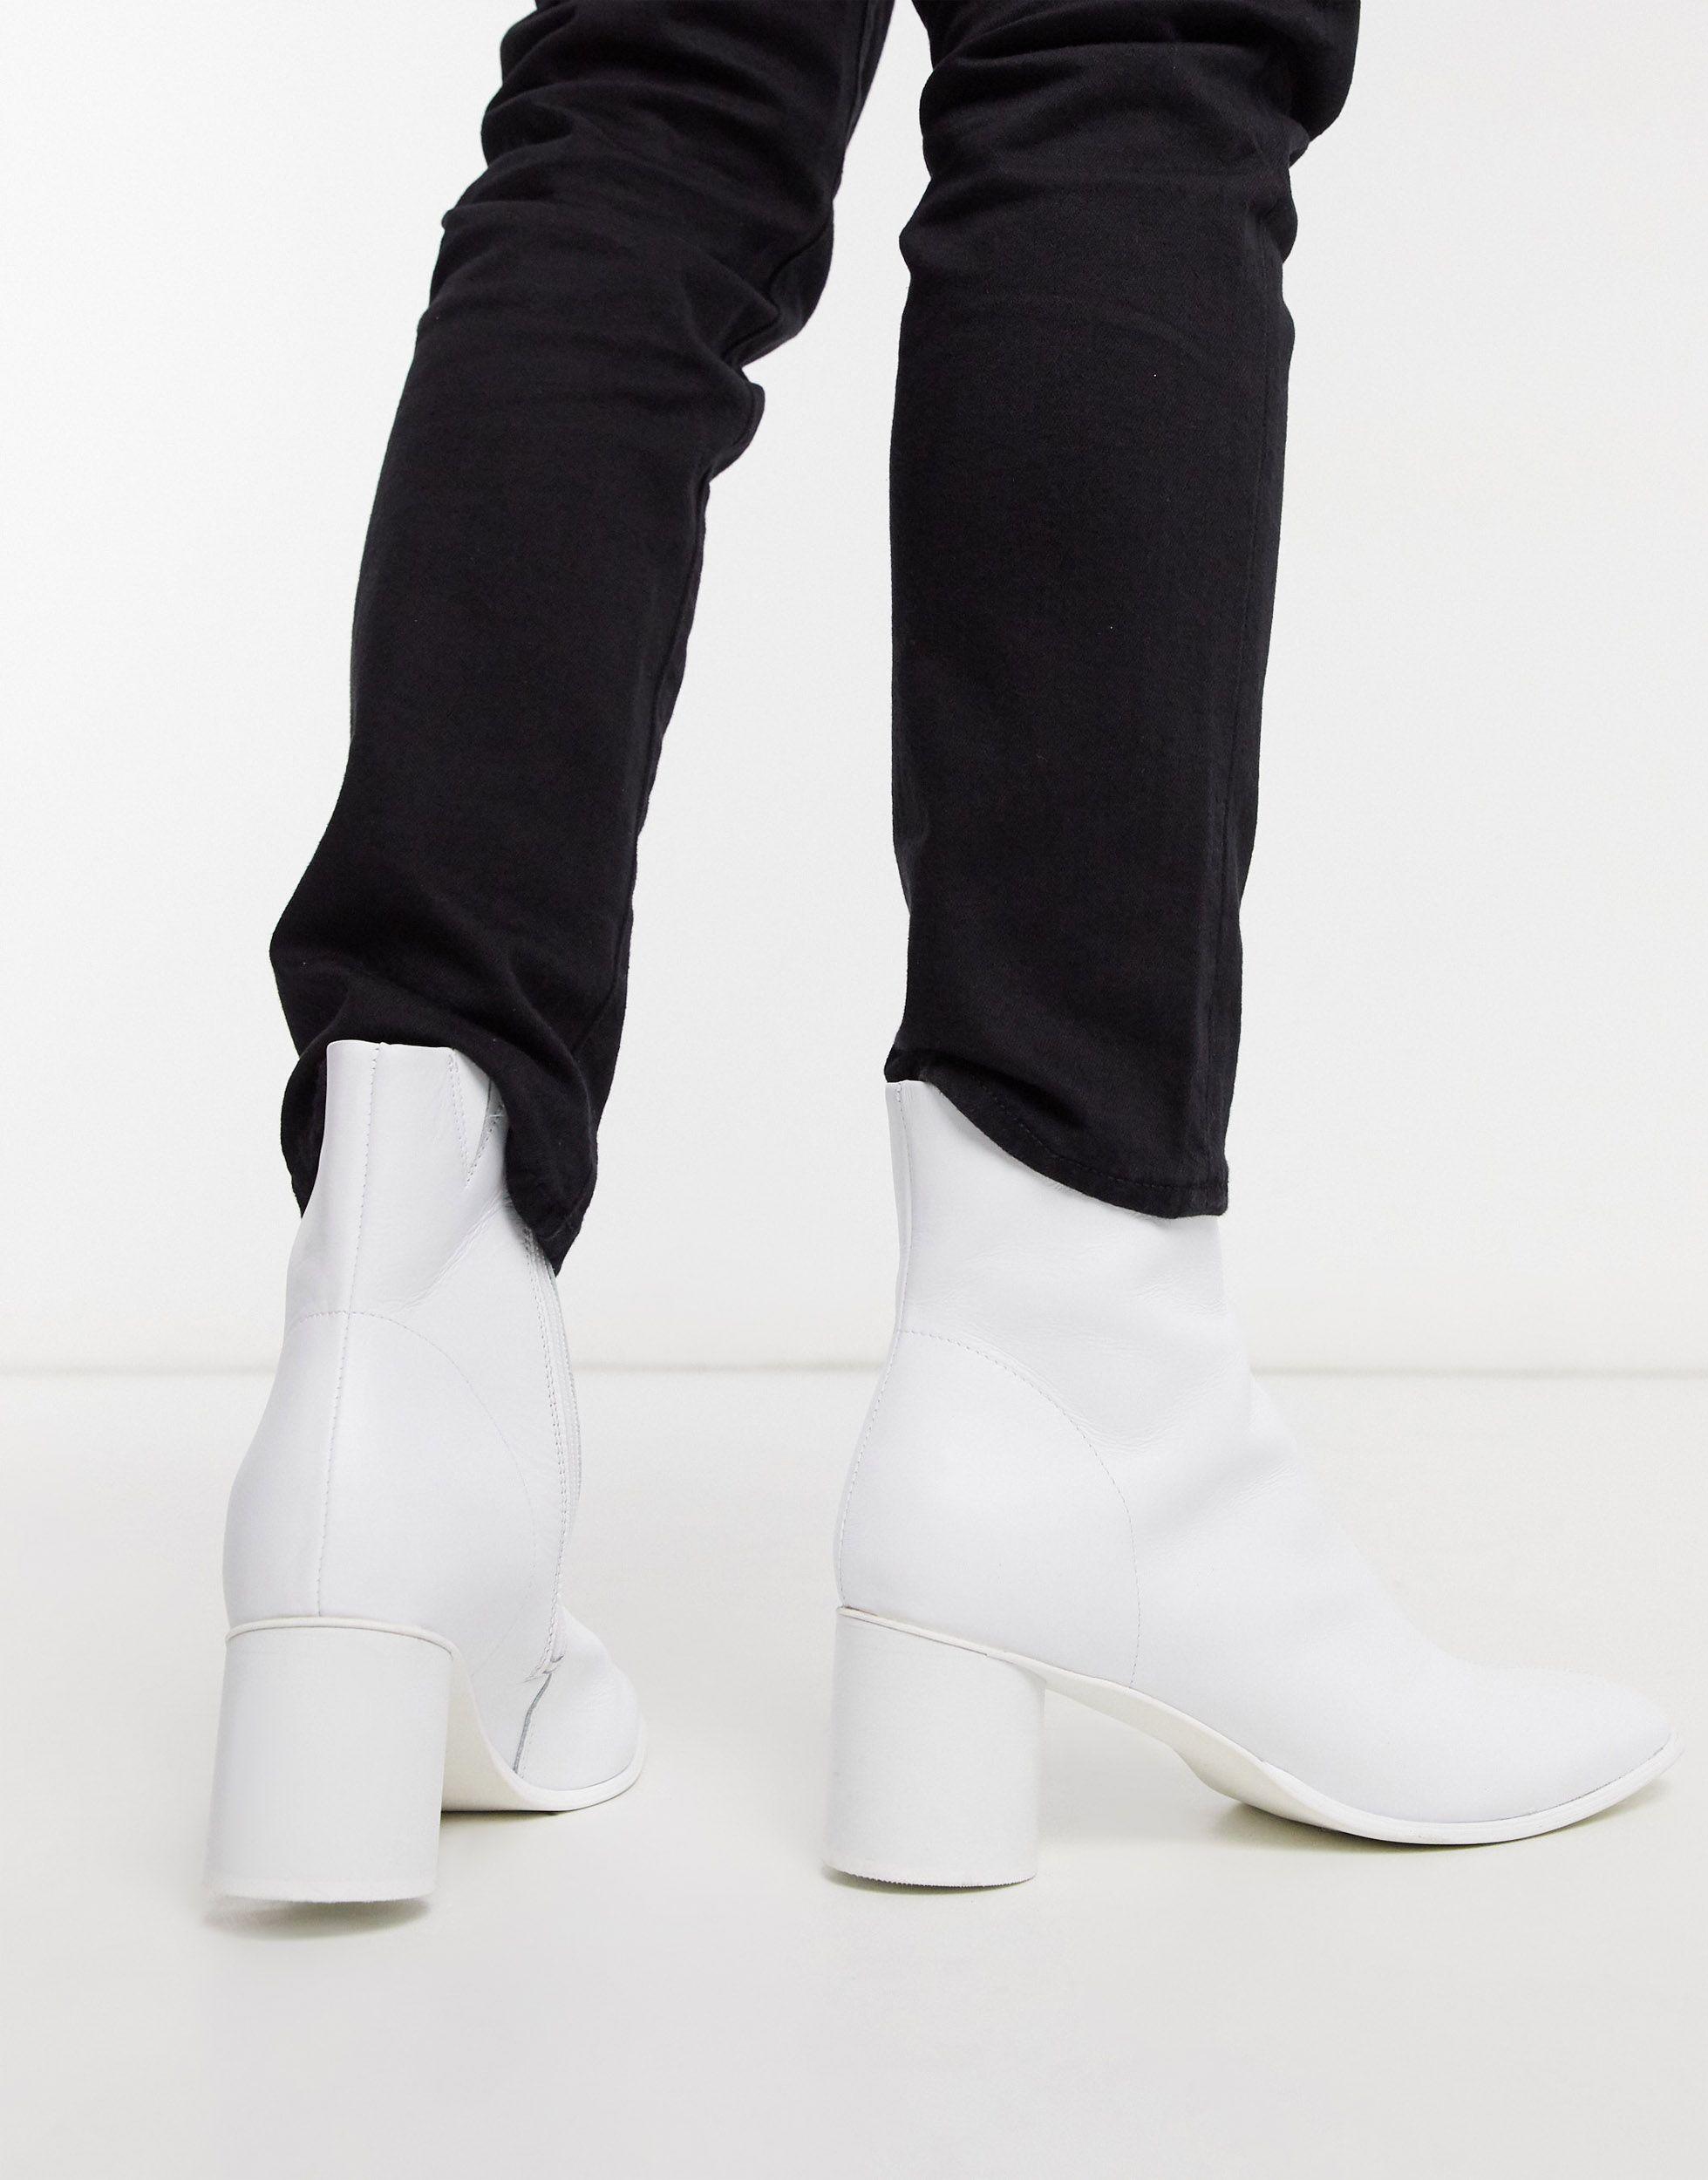 Mens White Chelsea Boots | vlr.eng.br